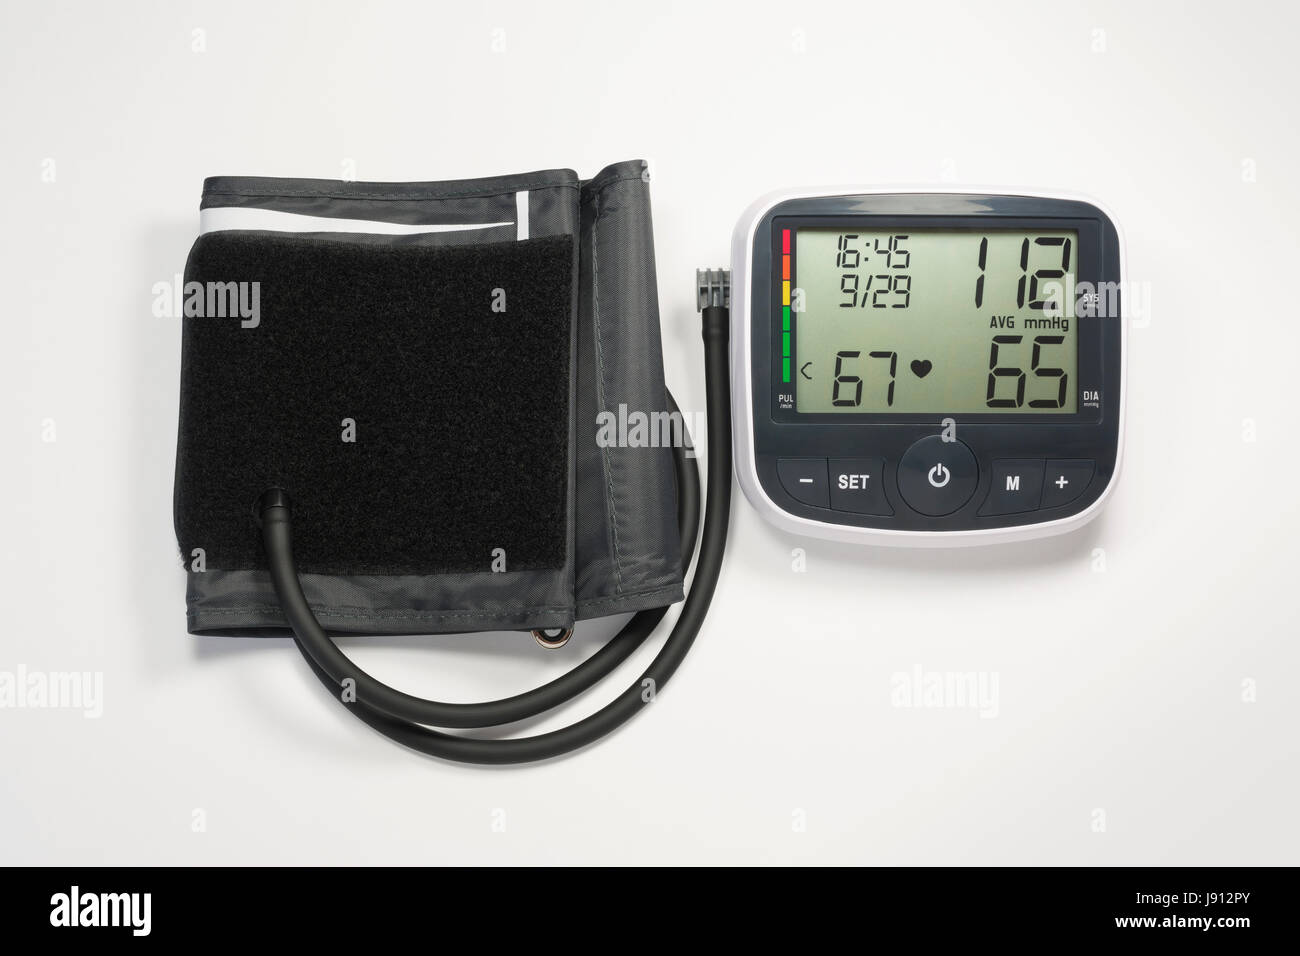 https://c8.alamy.com/comp/J912PY/upper-arm-blood-pressure-monitor-device-isolated-on-white-background-J912PY.jpg